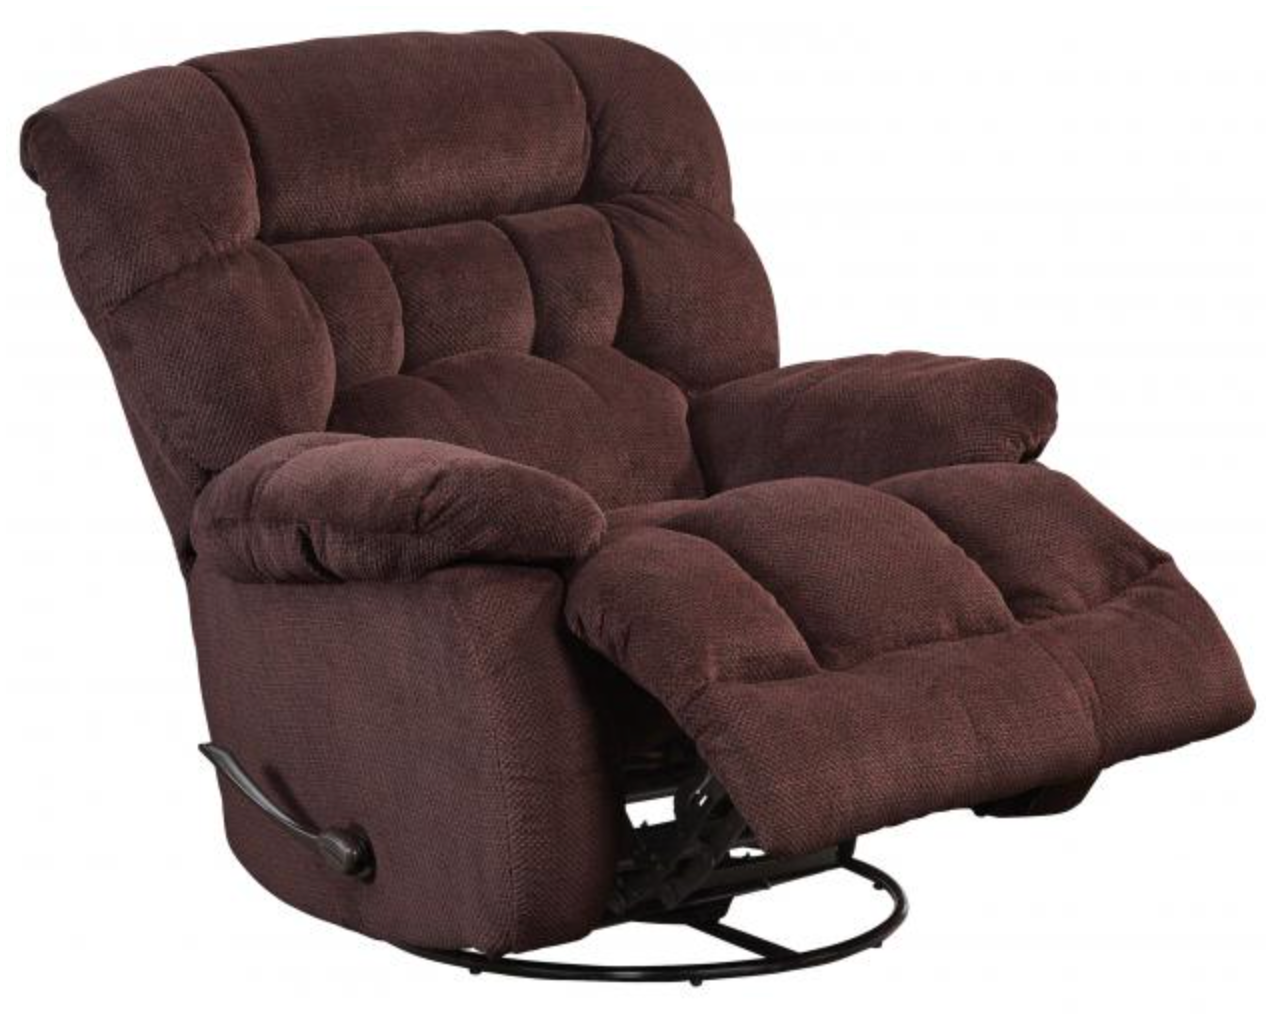 WEEKLY or MONTHLY. Daly's Comfort Chateau Swivel Glider Recliner